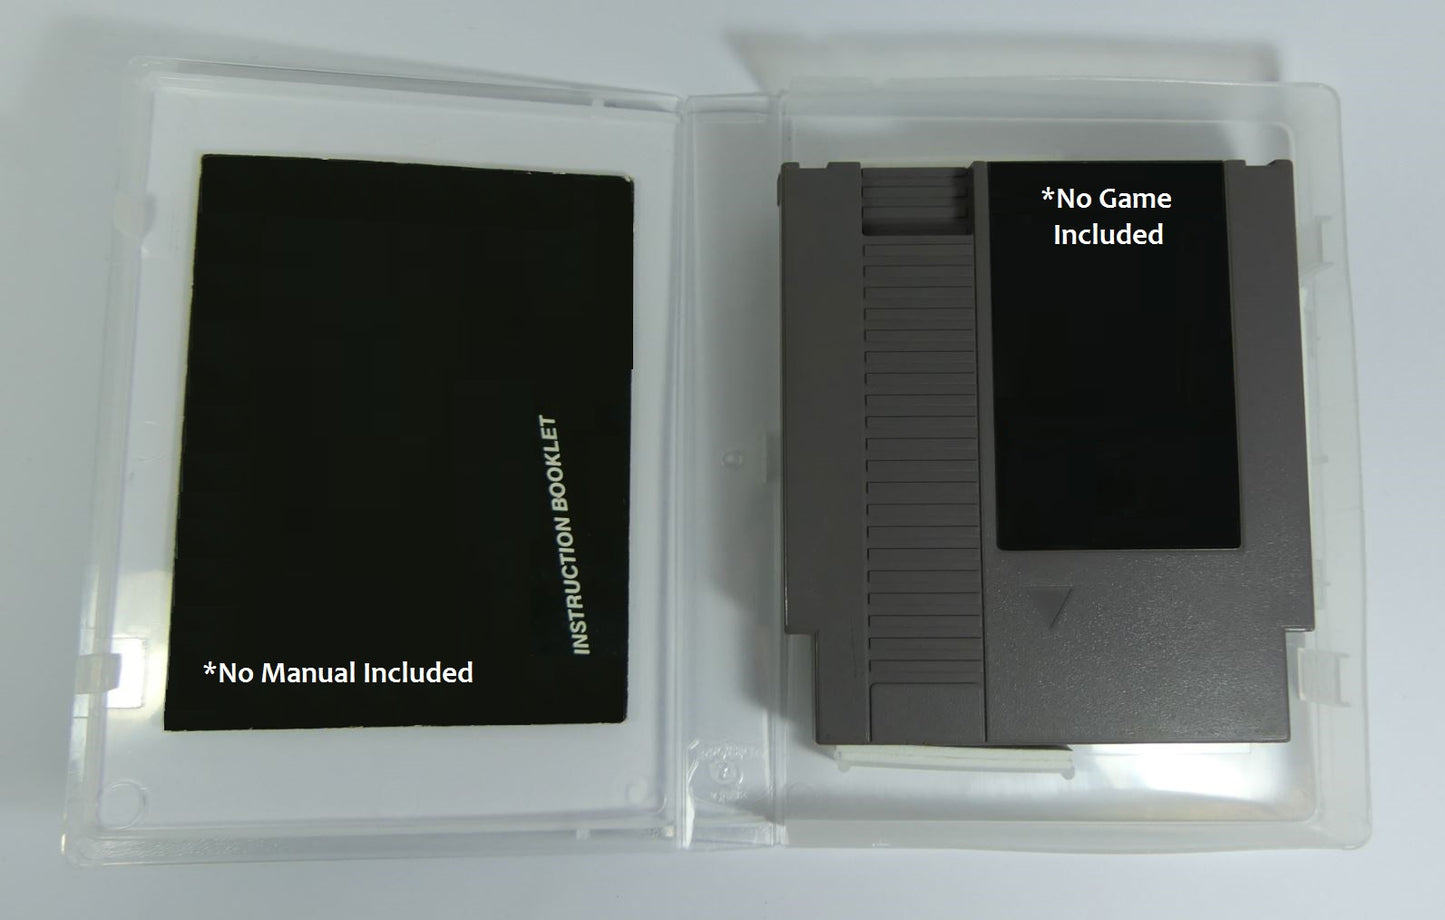 Arch Rivals - NES Replacement Case